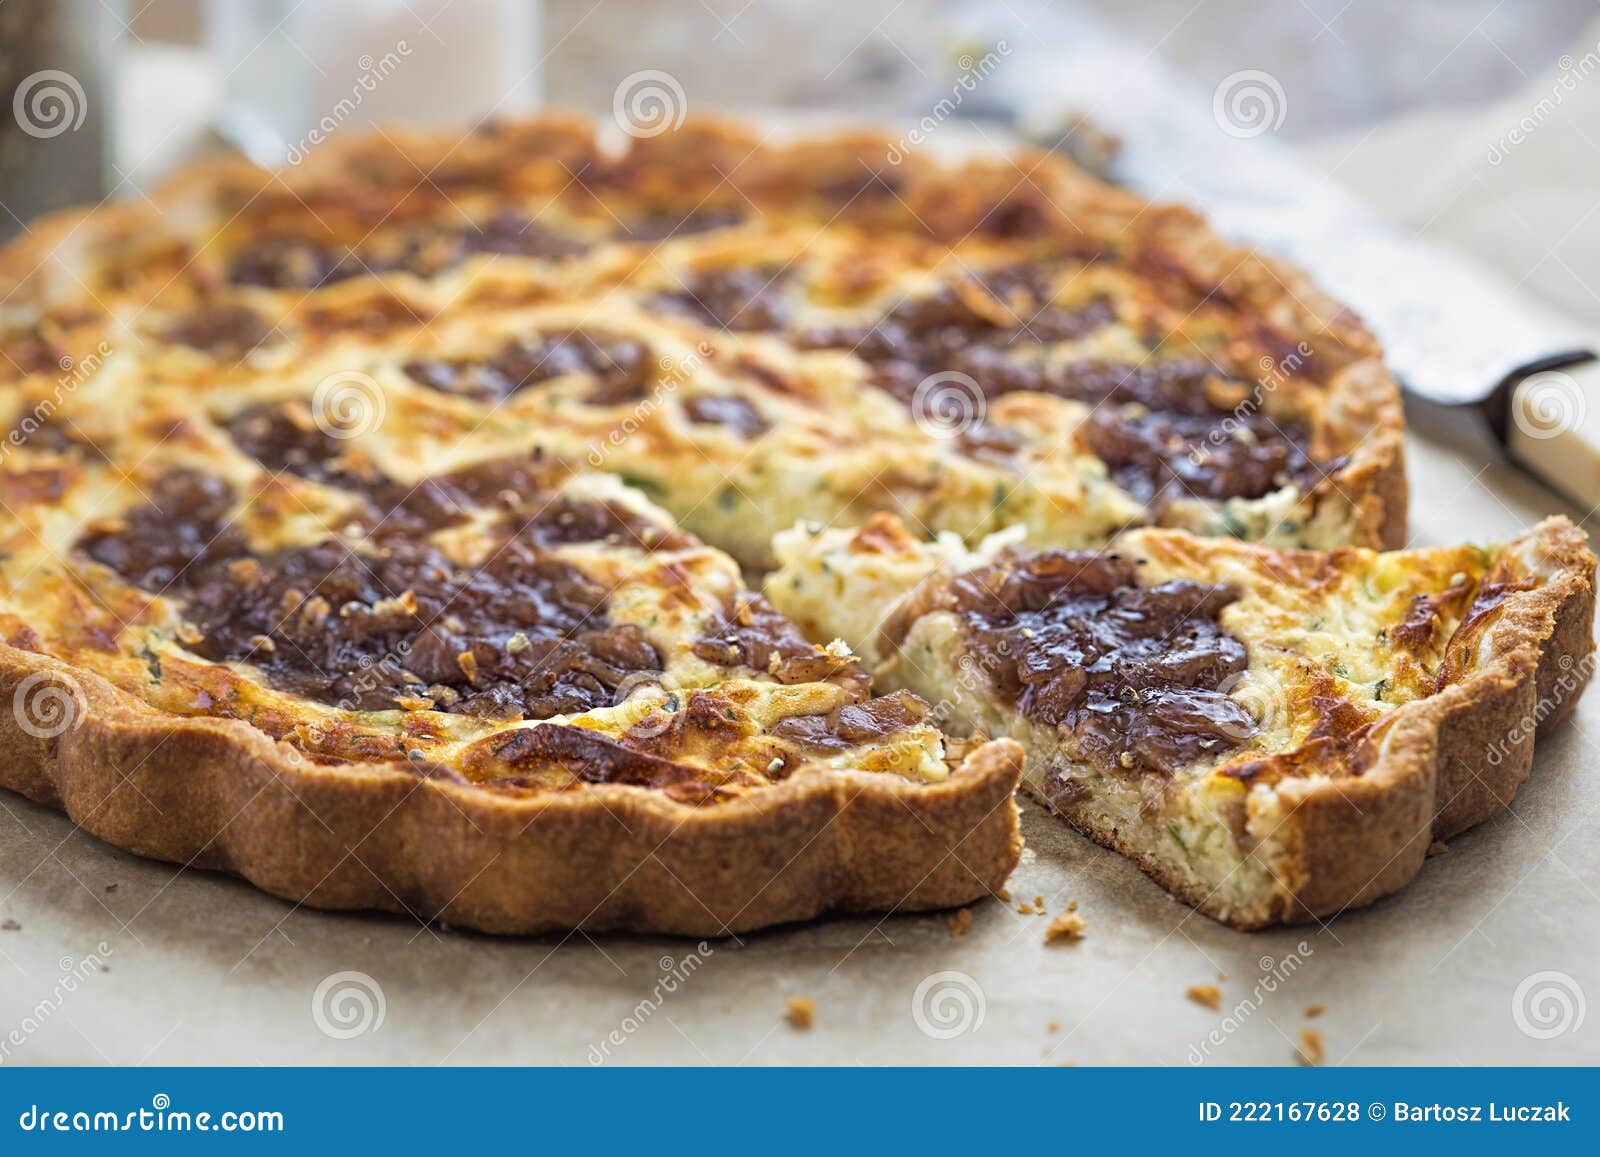 vintage cheddar caramelised red onion quiche